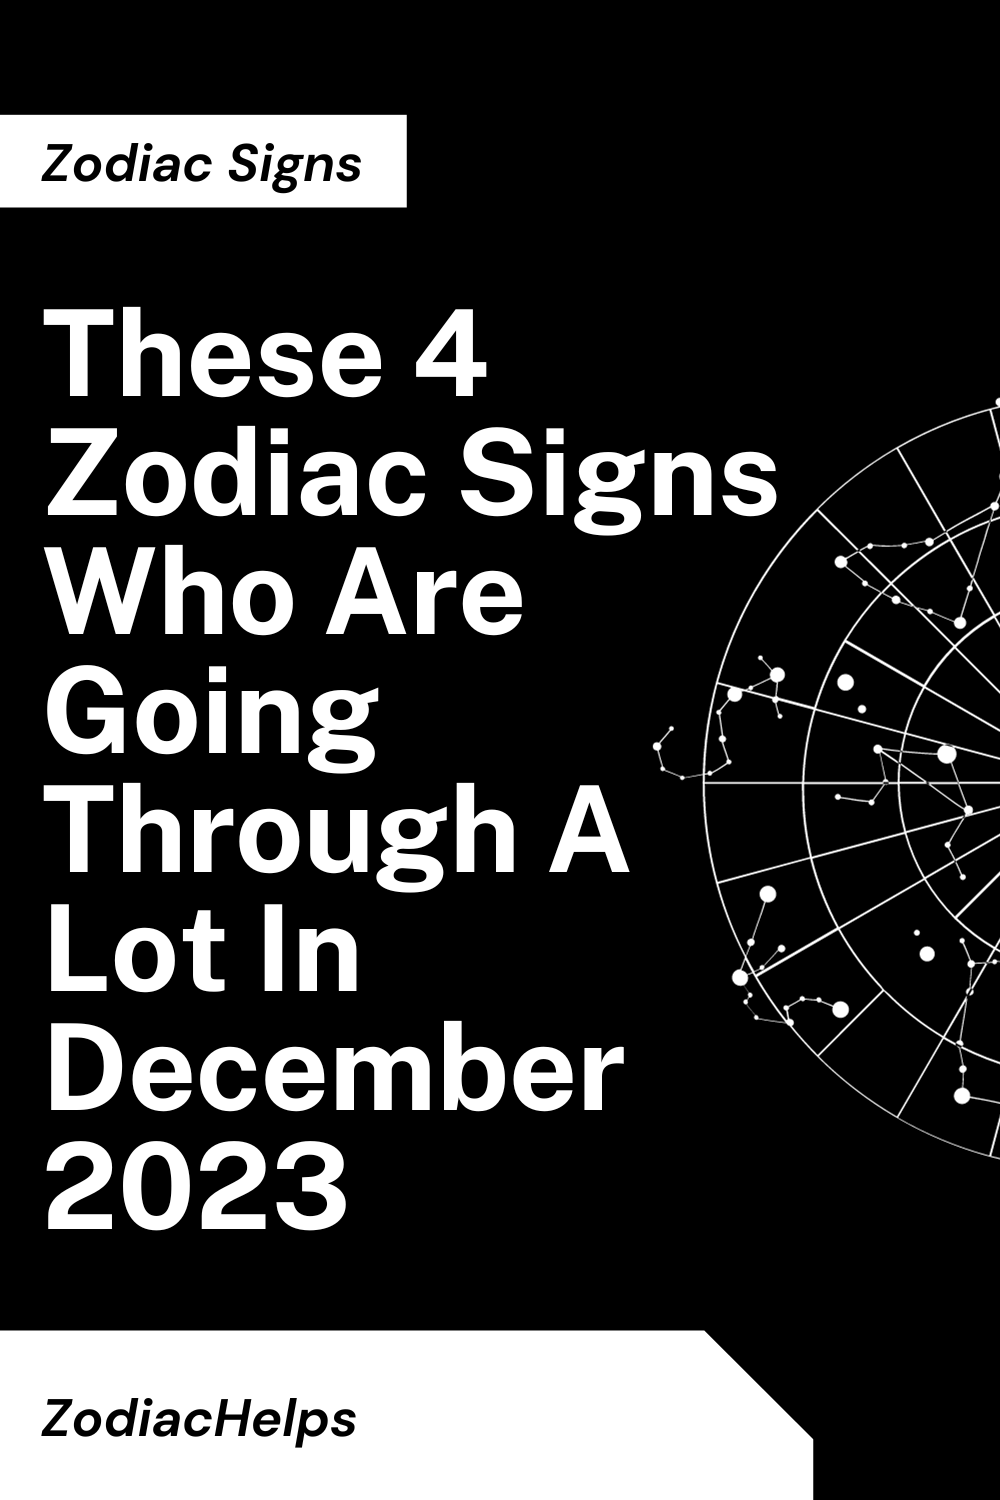 These 4 Zodiac Signs Who Are Going Through A Lot In December 2023